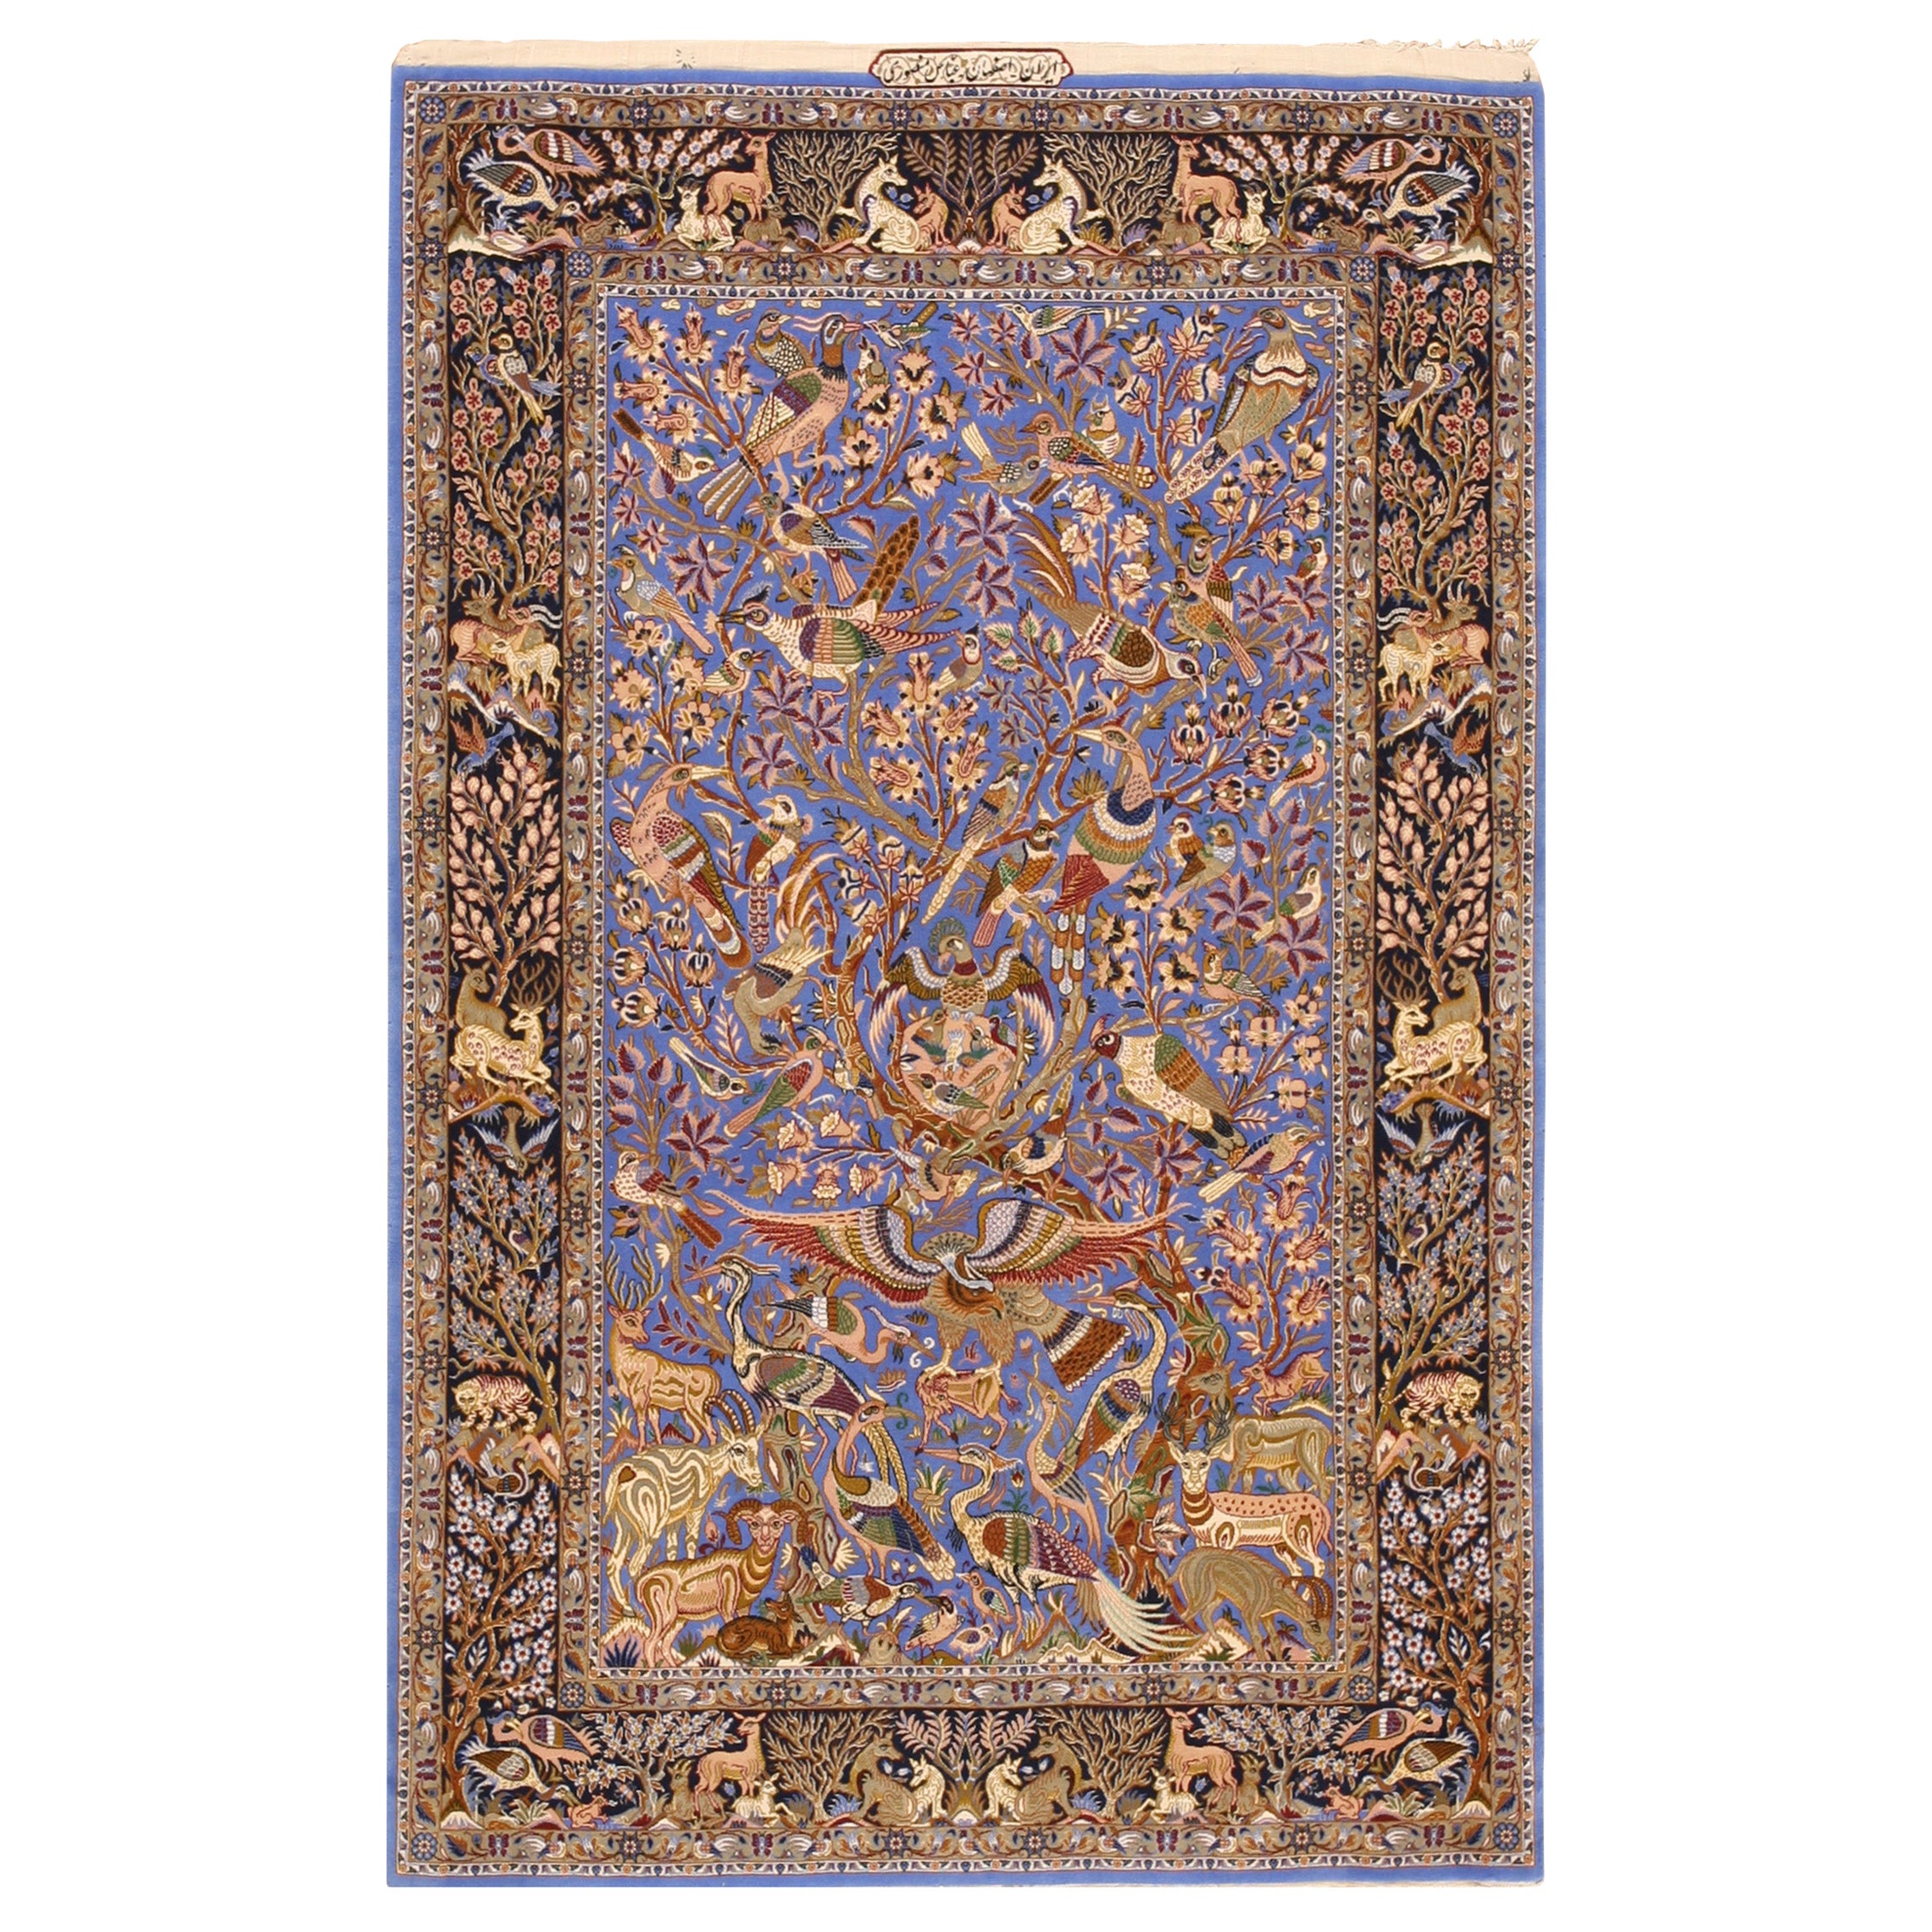 Mid 20th Century Persian Isfahan Silk Carpet ( 3' 2" x 5' 6" - 97 x 167 cm ) For Sale